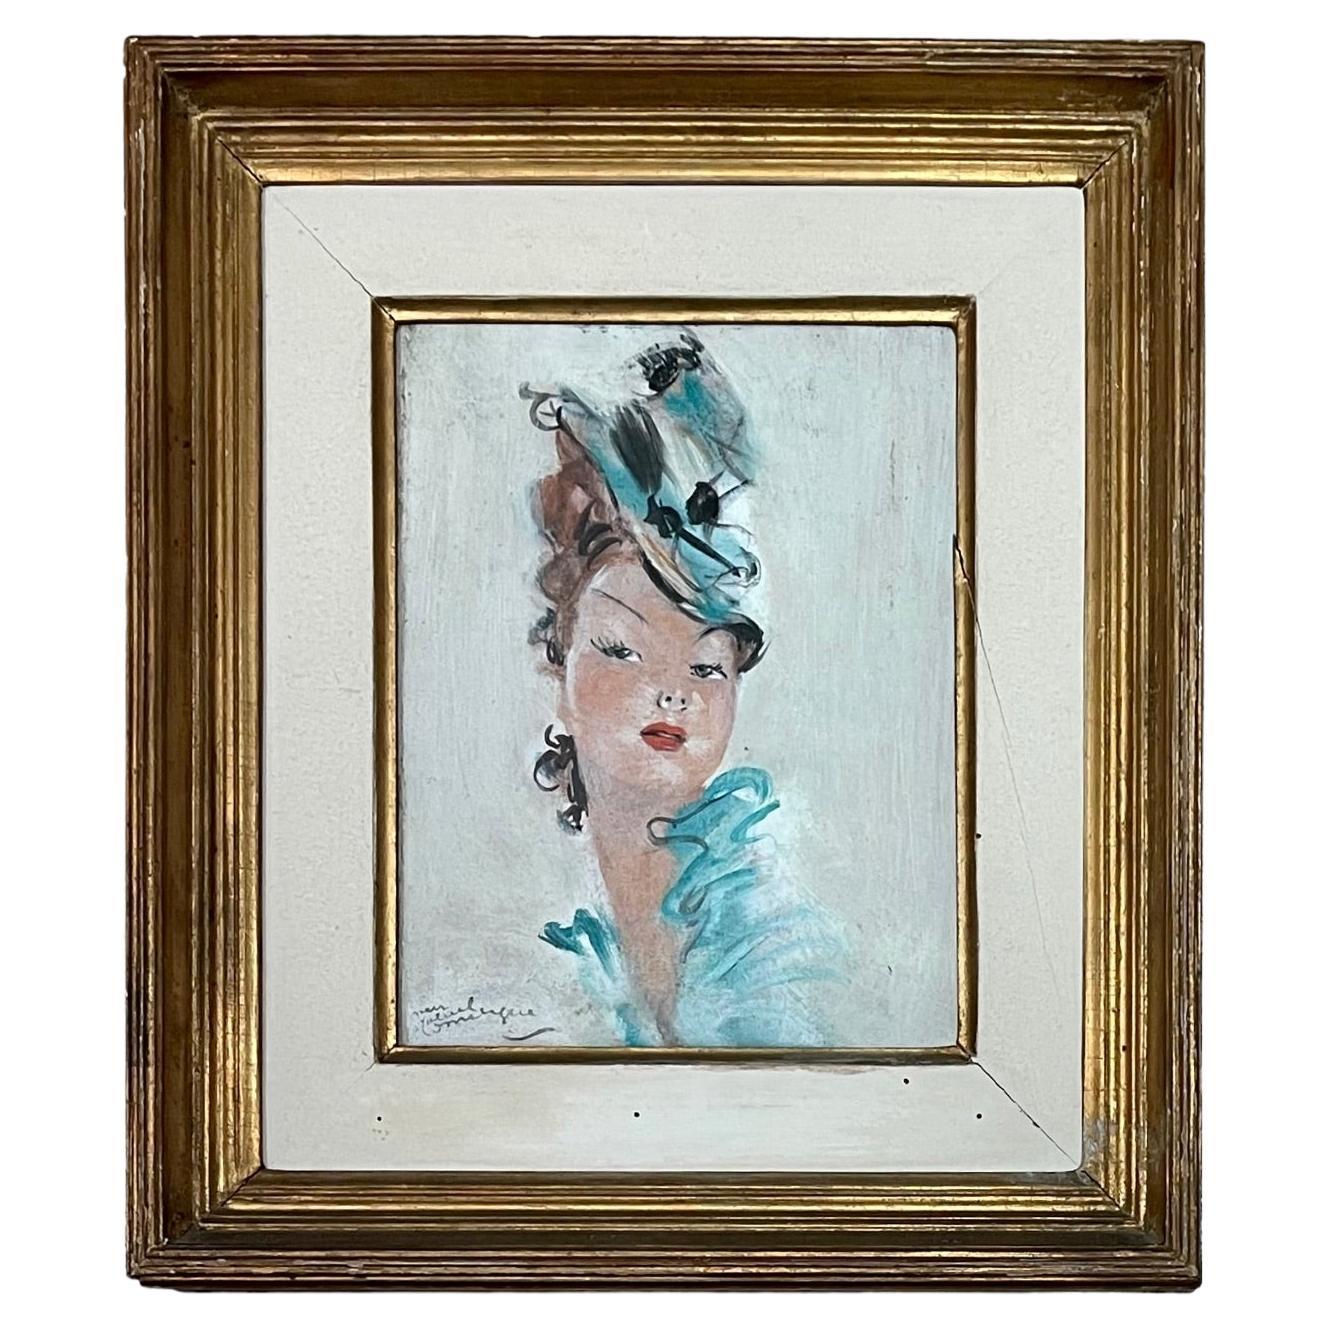 Jean-Gabriel DOMERGUE - Portrait of an Elegant Woman, her first name "Guite" For Sale